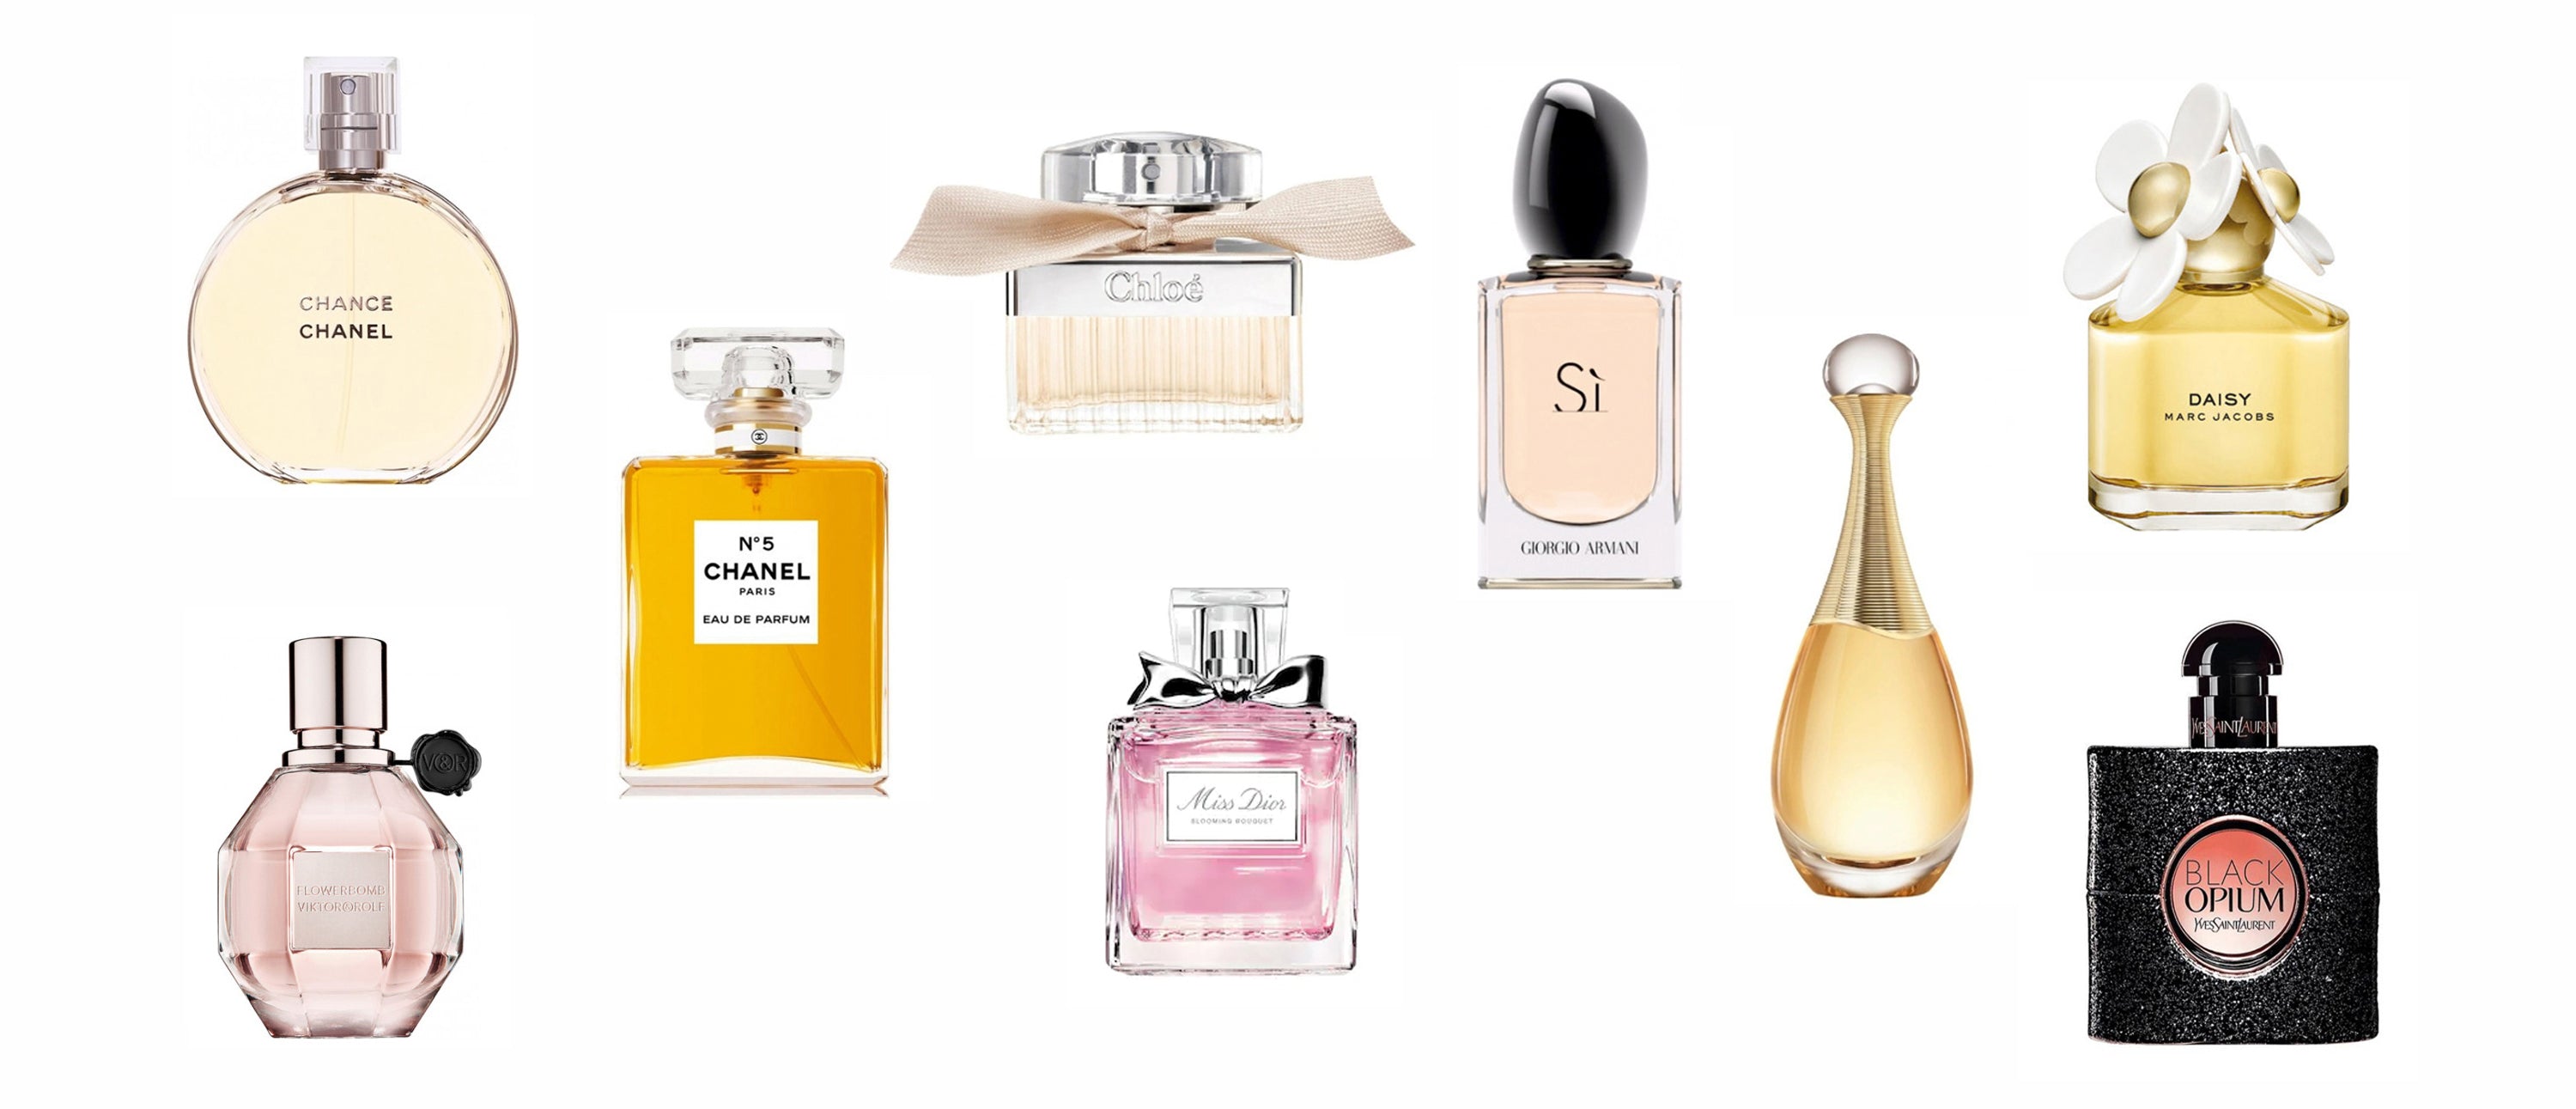 Which perfume is best for men to gift? - Quora